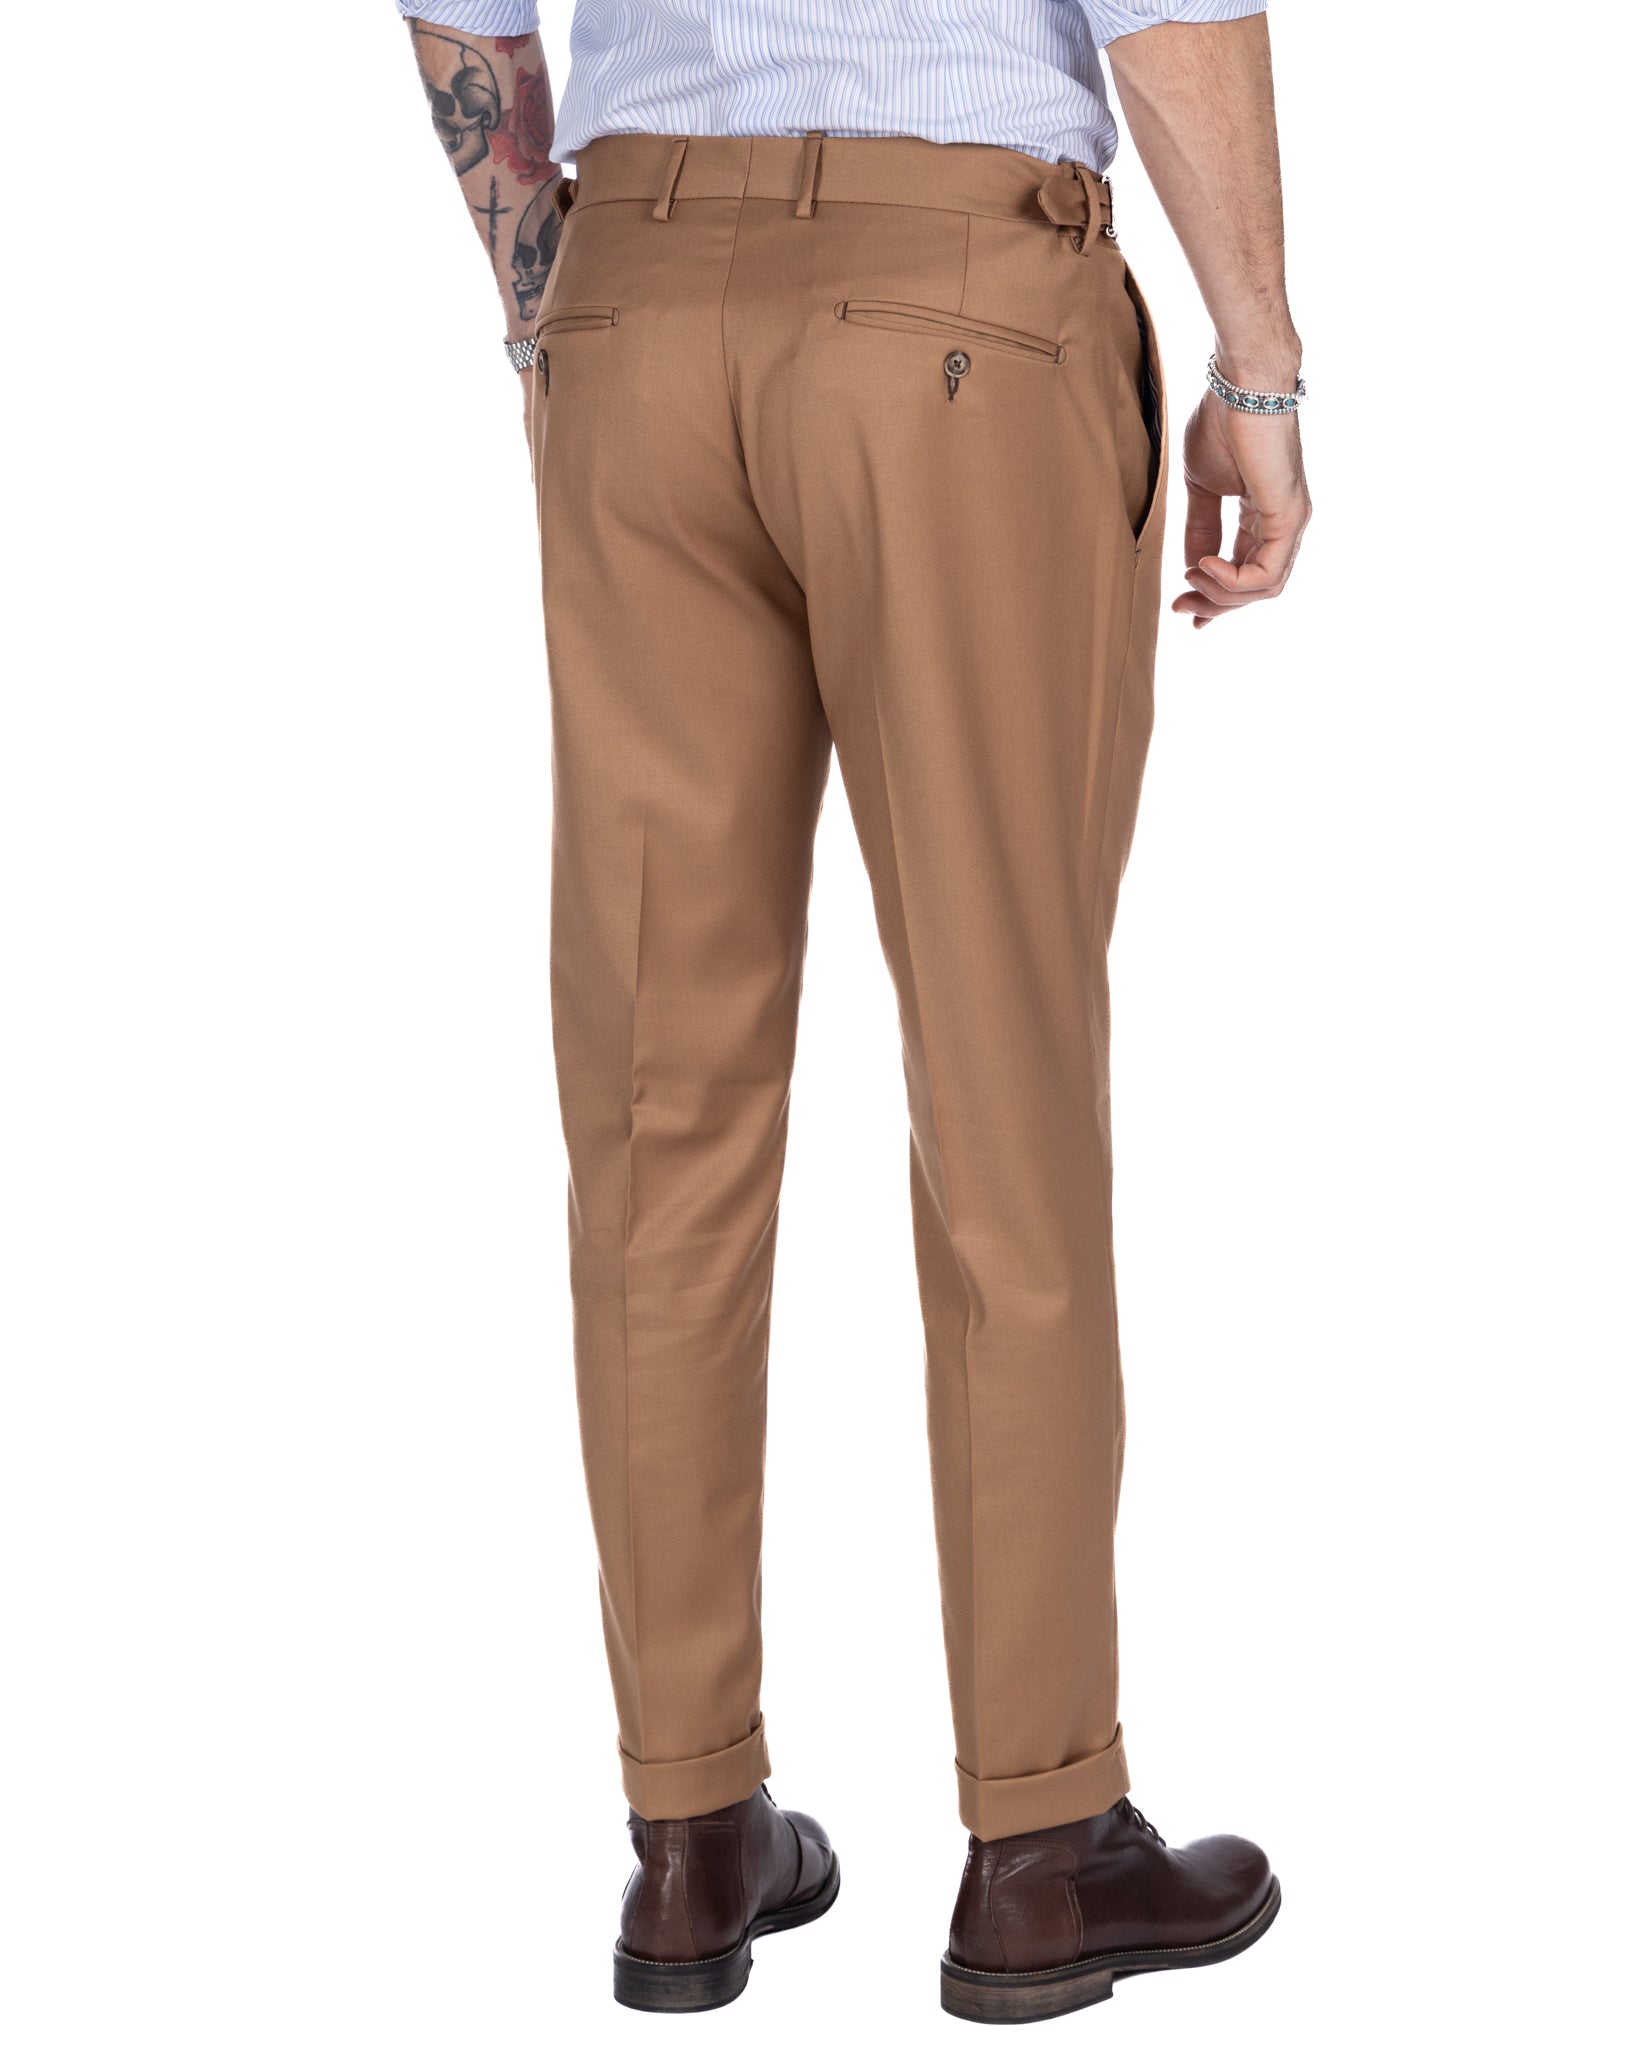 Monopoli - trousers with camel buckles